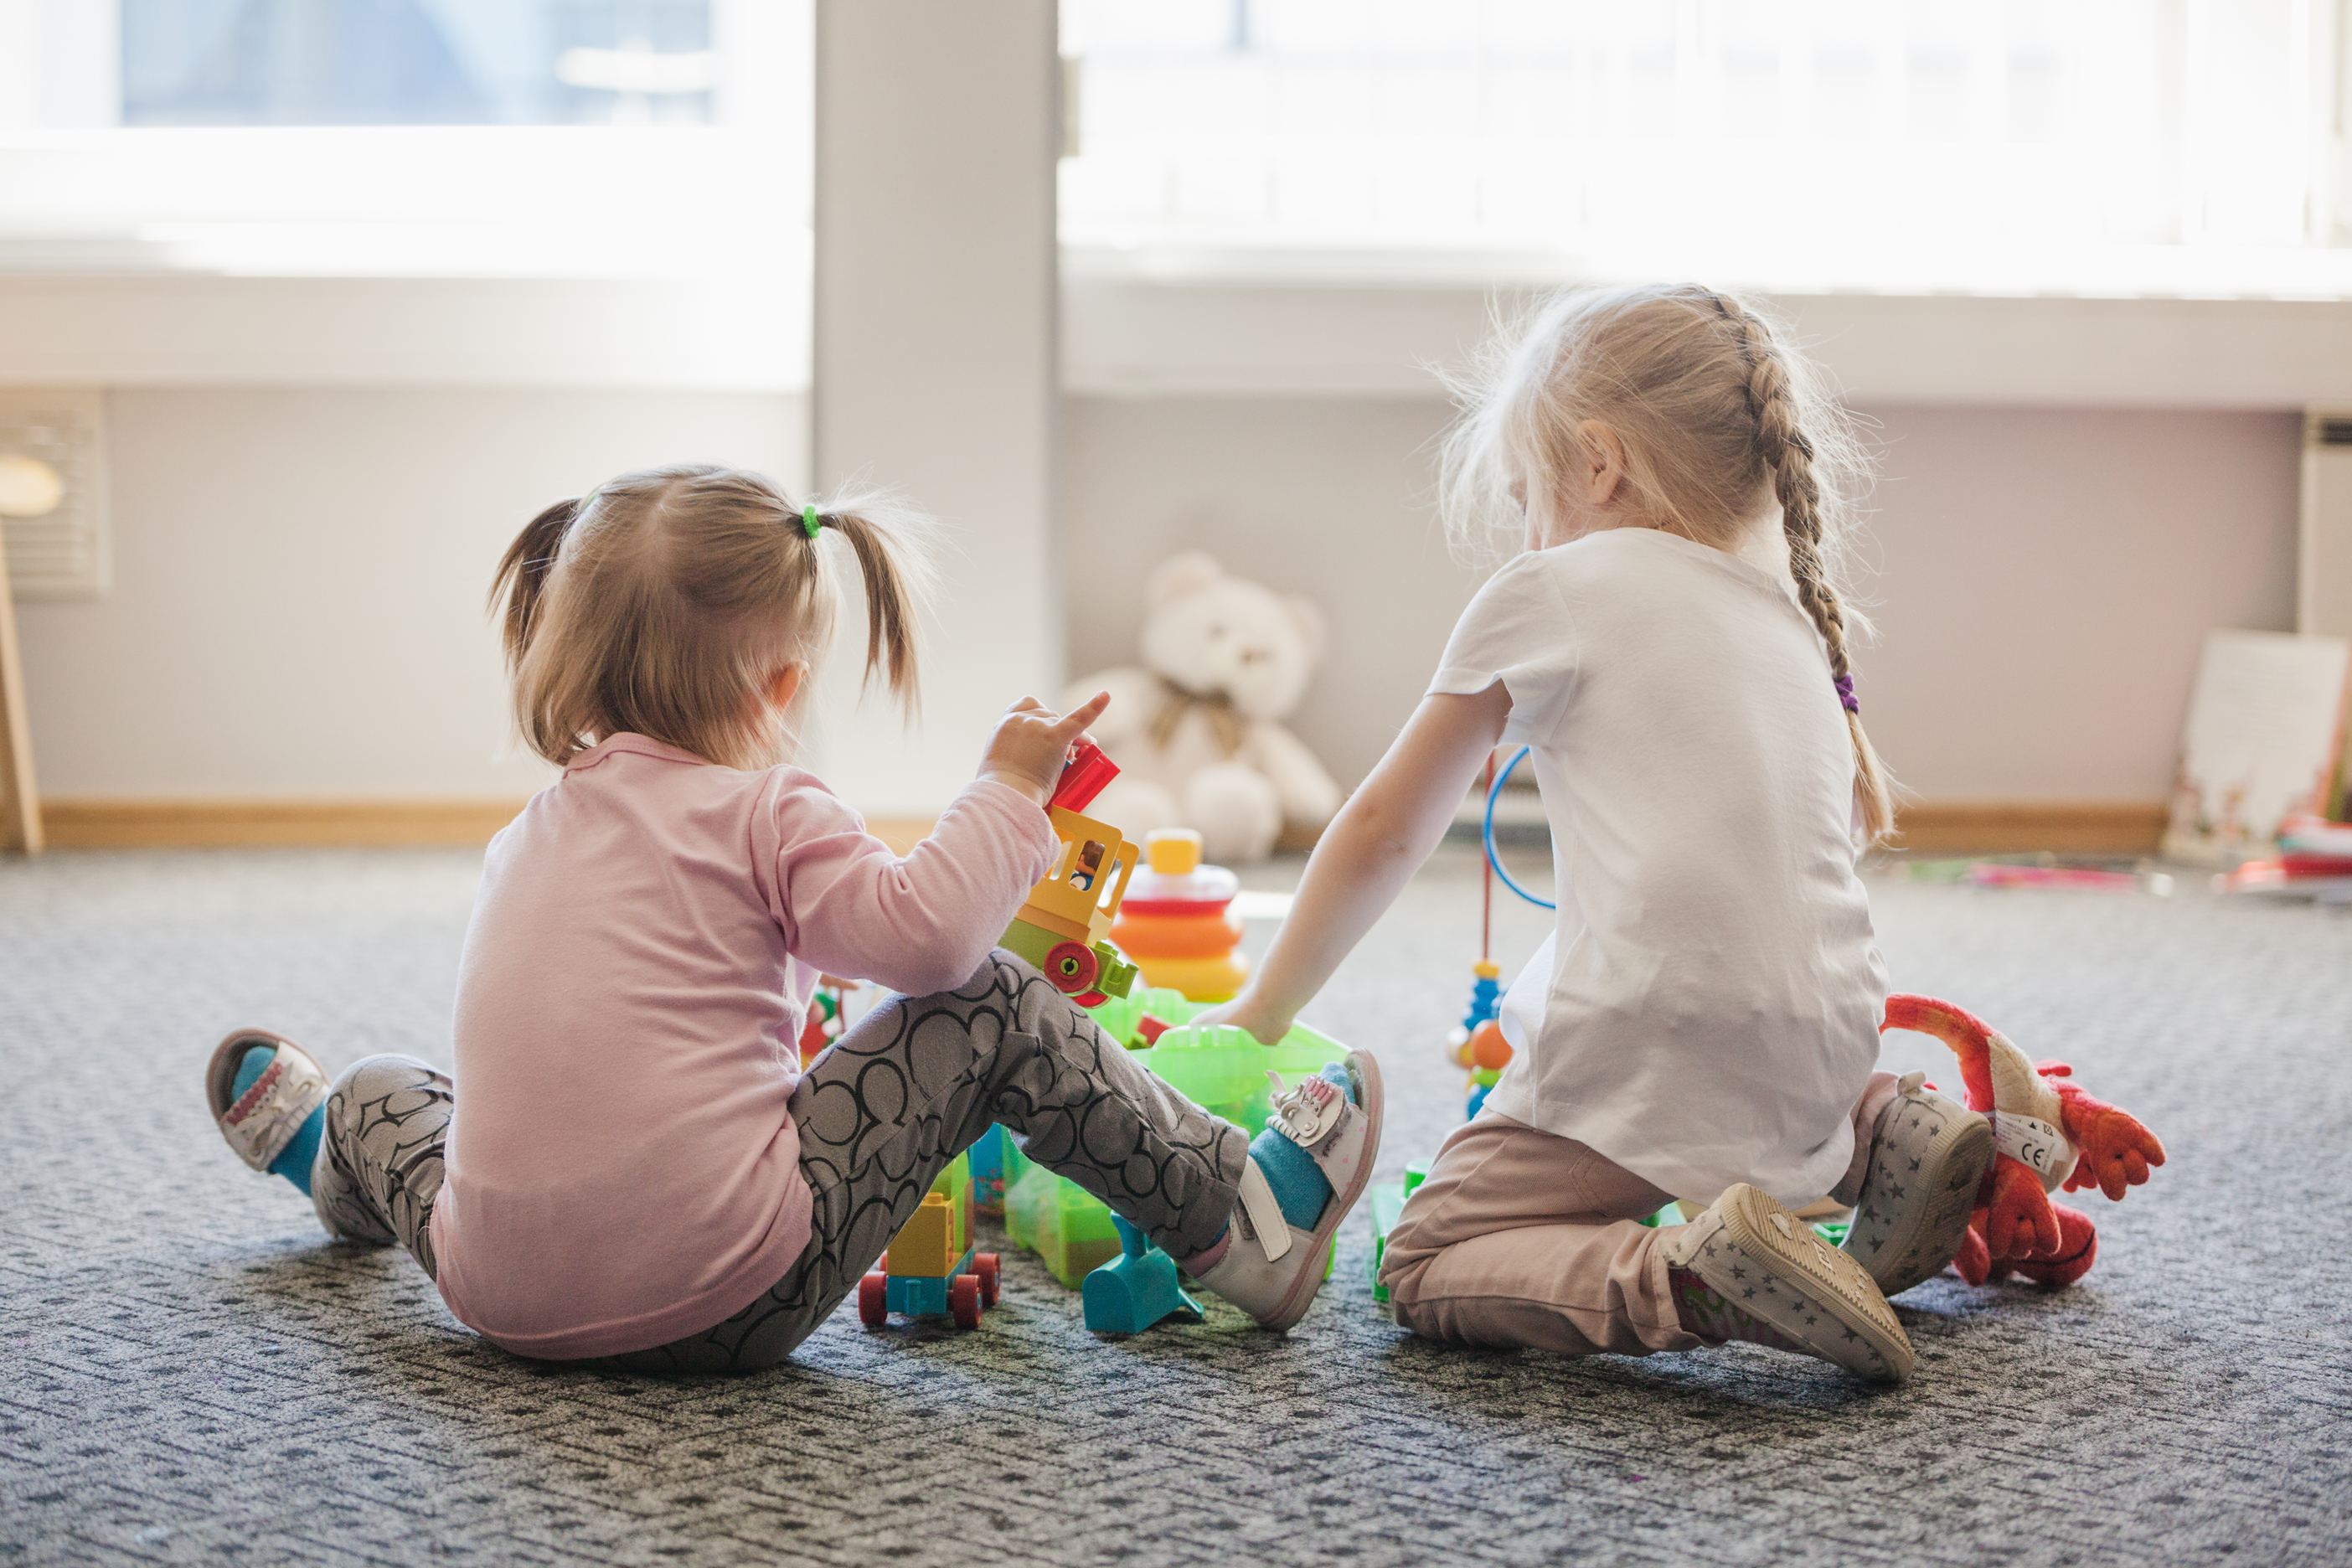 The Crucial Role of Social Play for Toddlers' Development